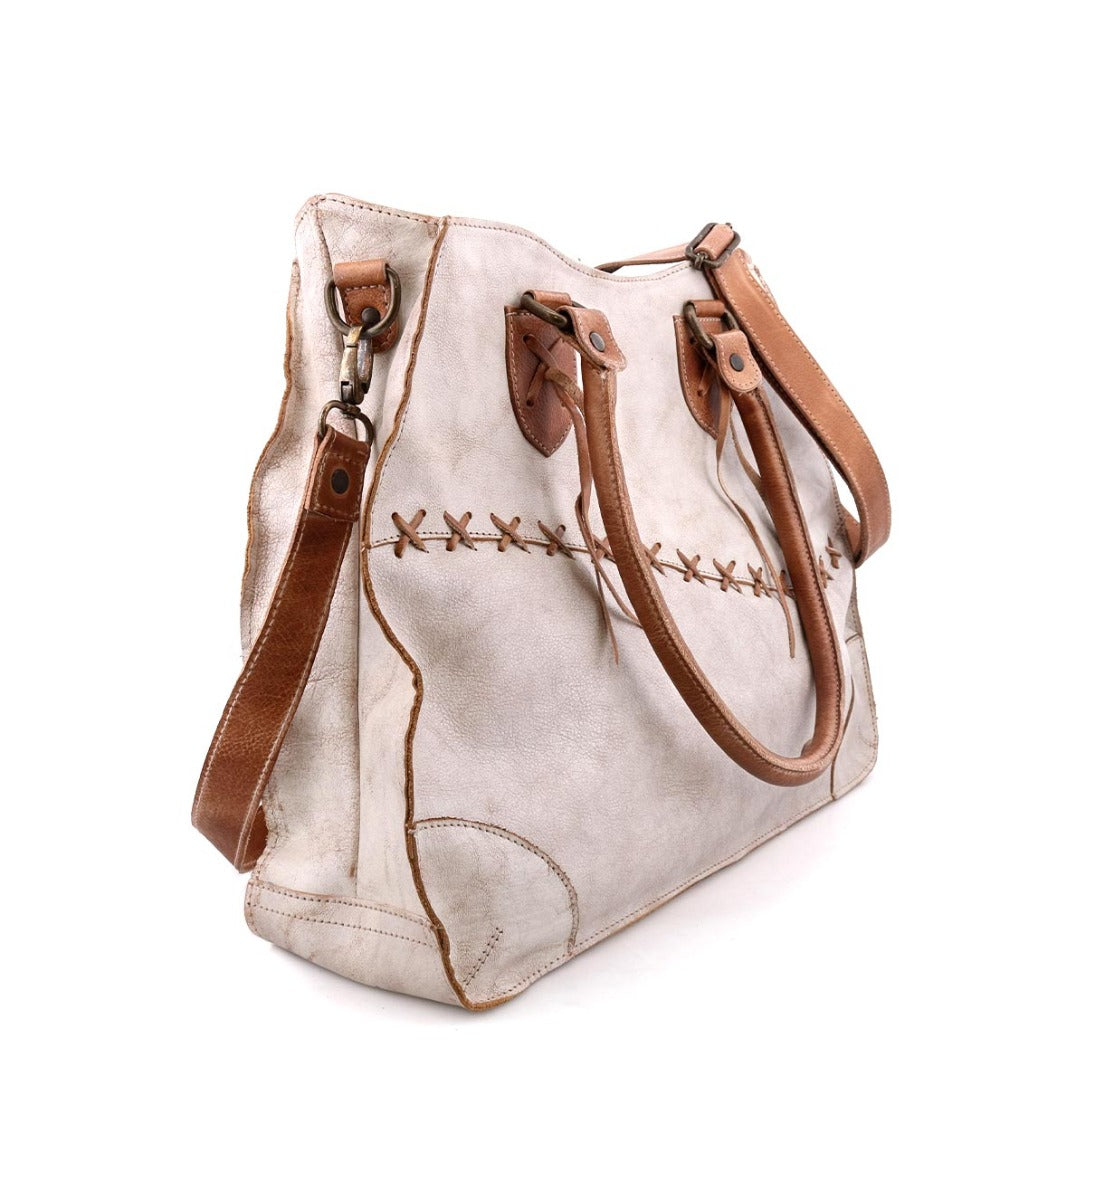 A white and tan Bed Stu Bruna pure leather bag with straps.